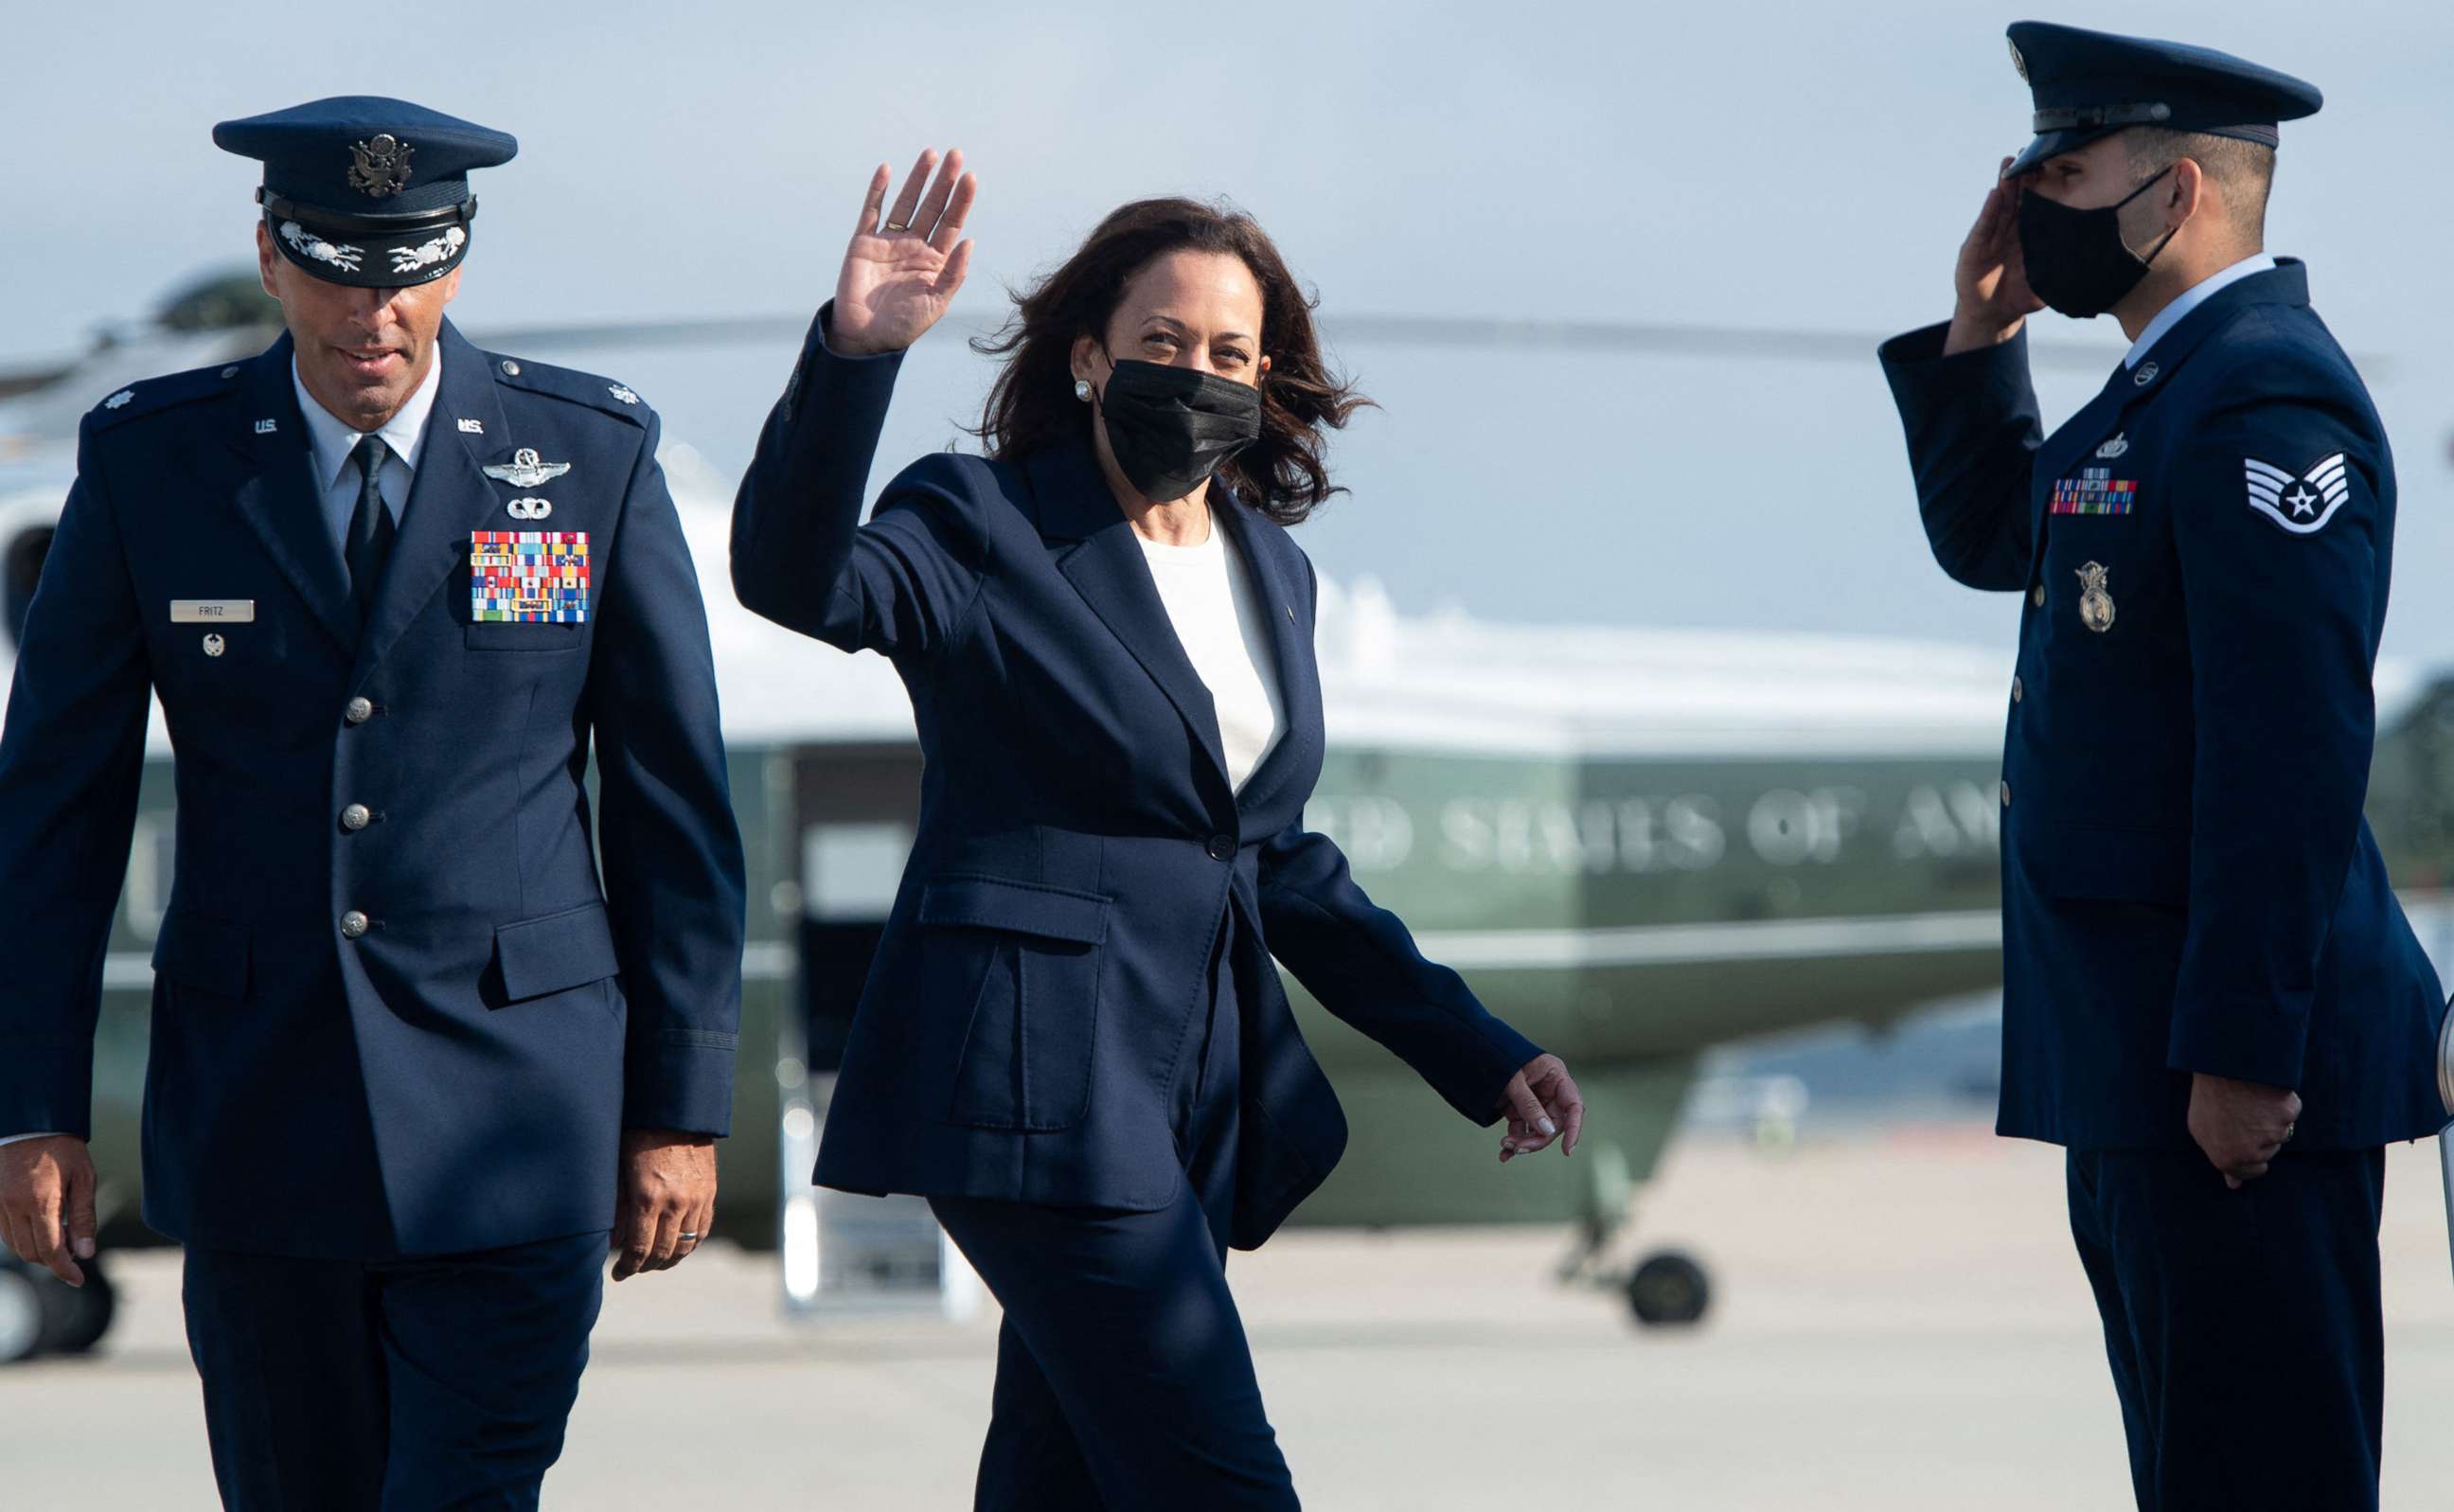 PHOTO: Vice President Kamala Harris boards Air Force Two prior to departure from Joint Base Andrews in Maryland, Sept. 8, 2021, as she travels to California to campaign for California Governor Gavin Newsom.